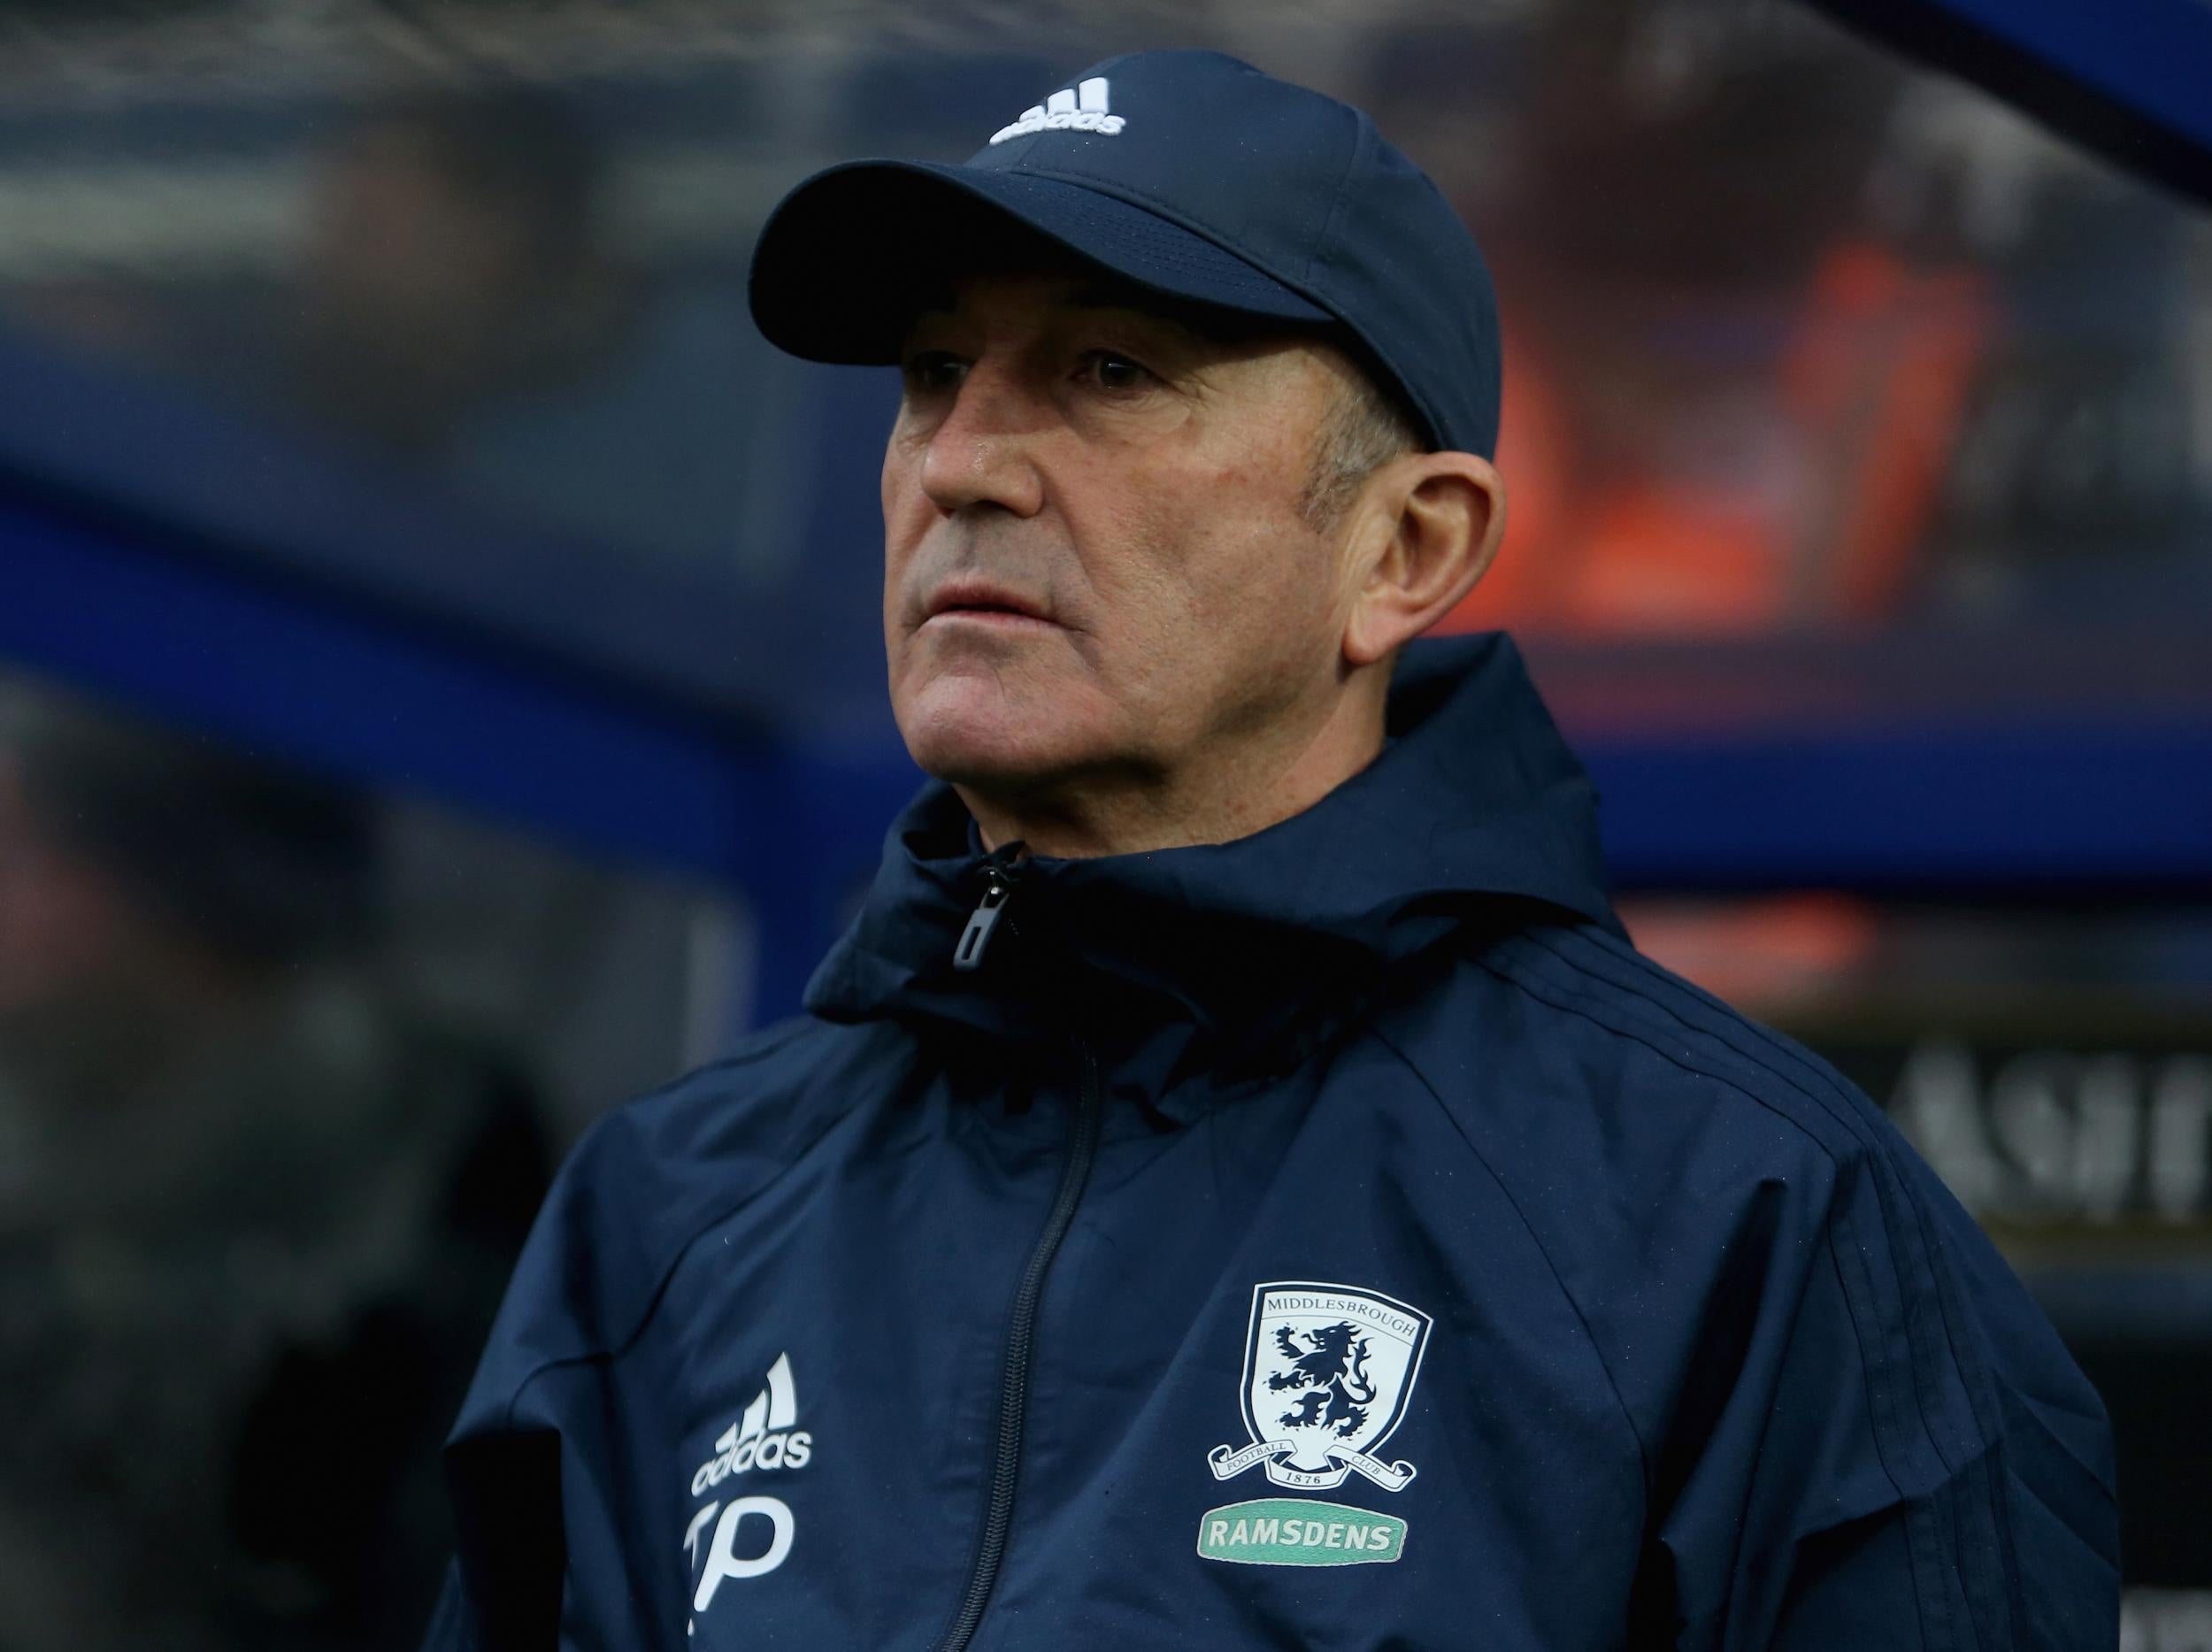 Tony Pulis is attempting to lead Middlesbrough back into the Premier League